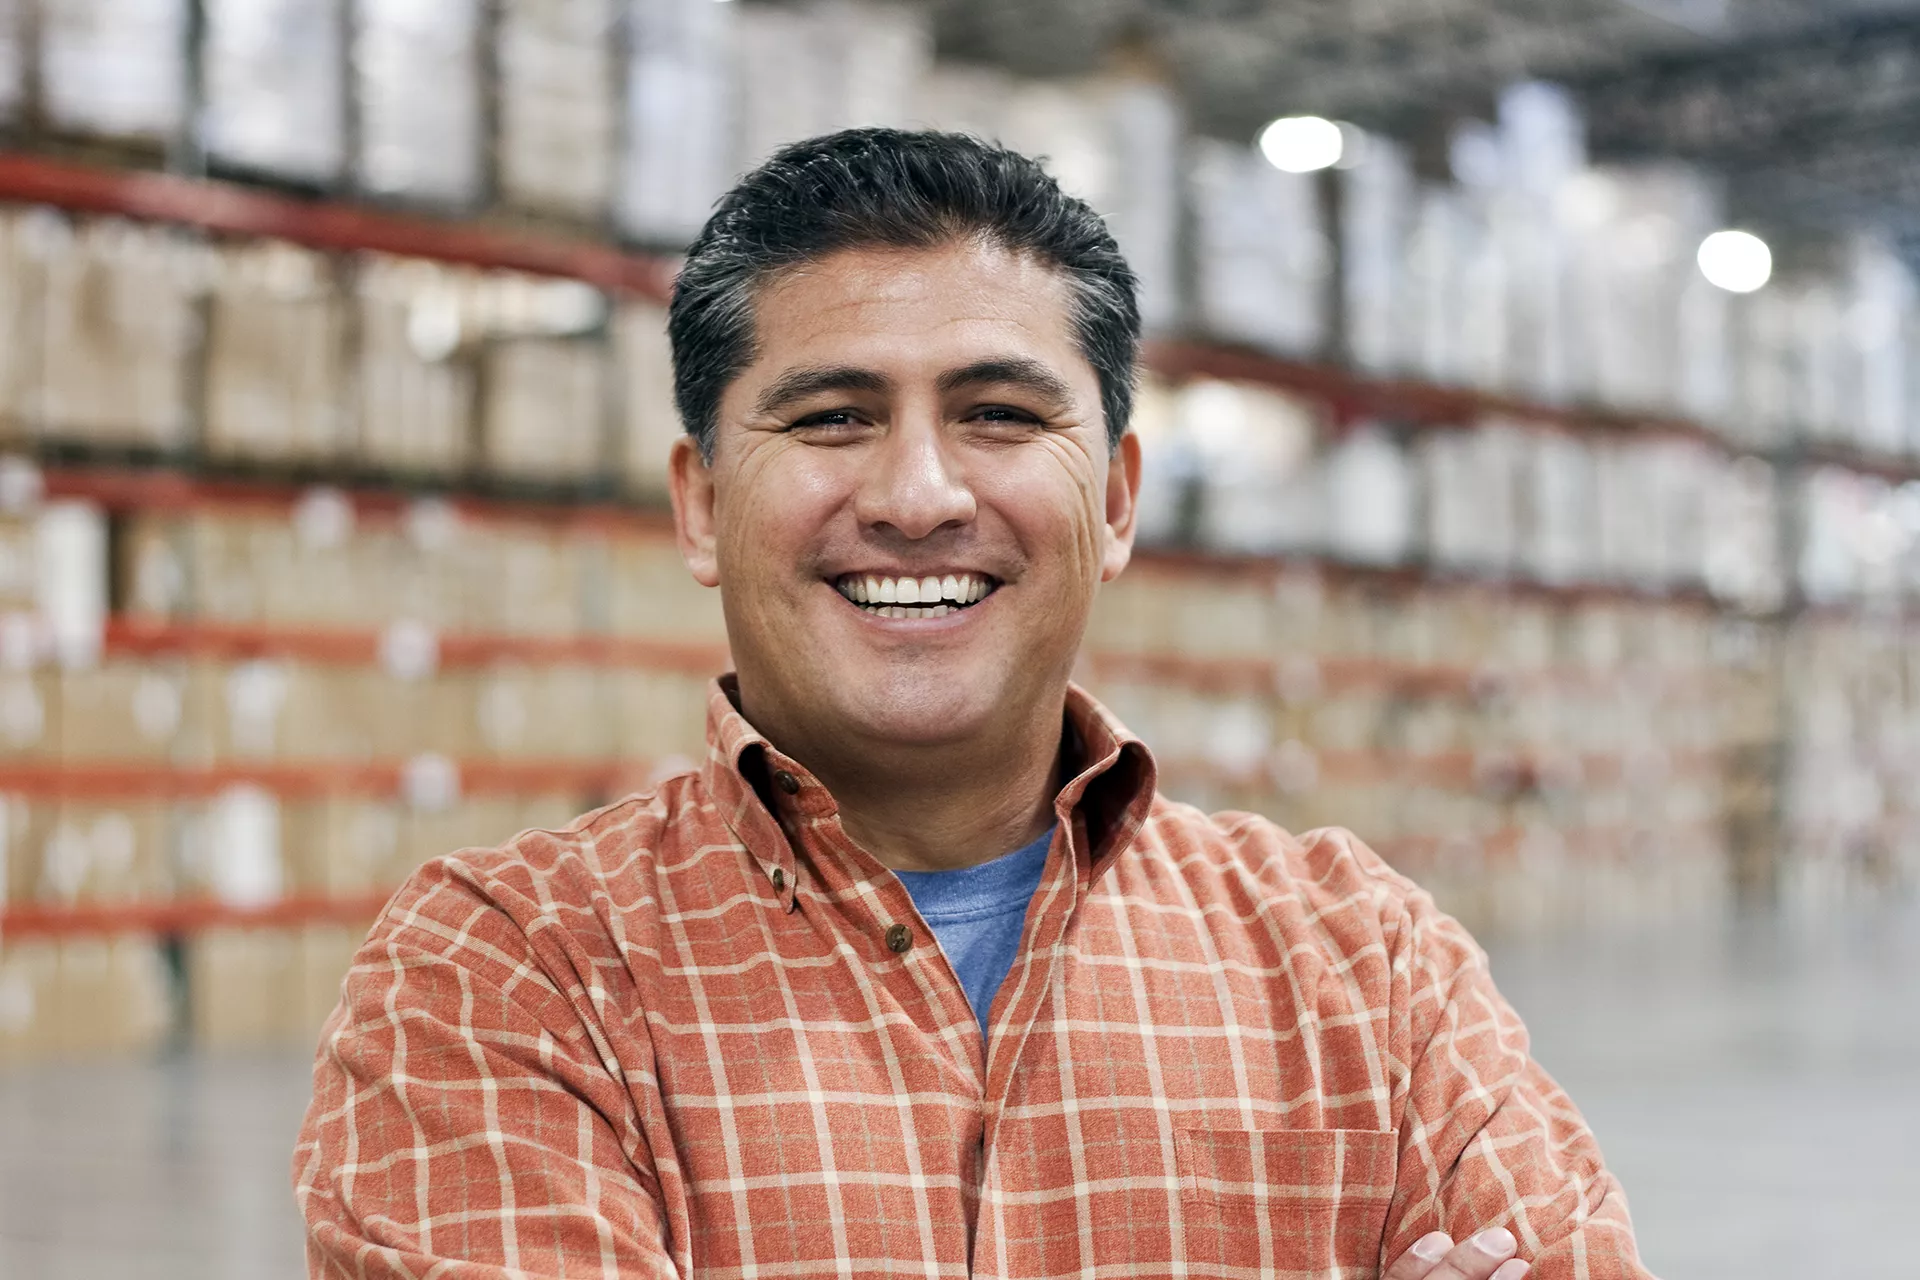 Man smiling and standing on warehouse floor